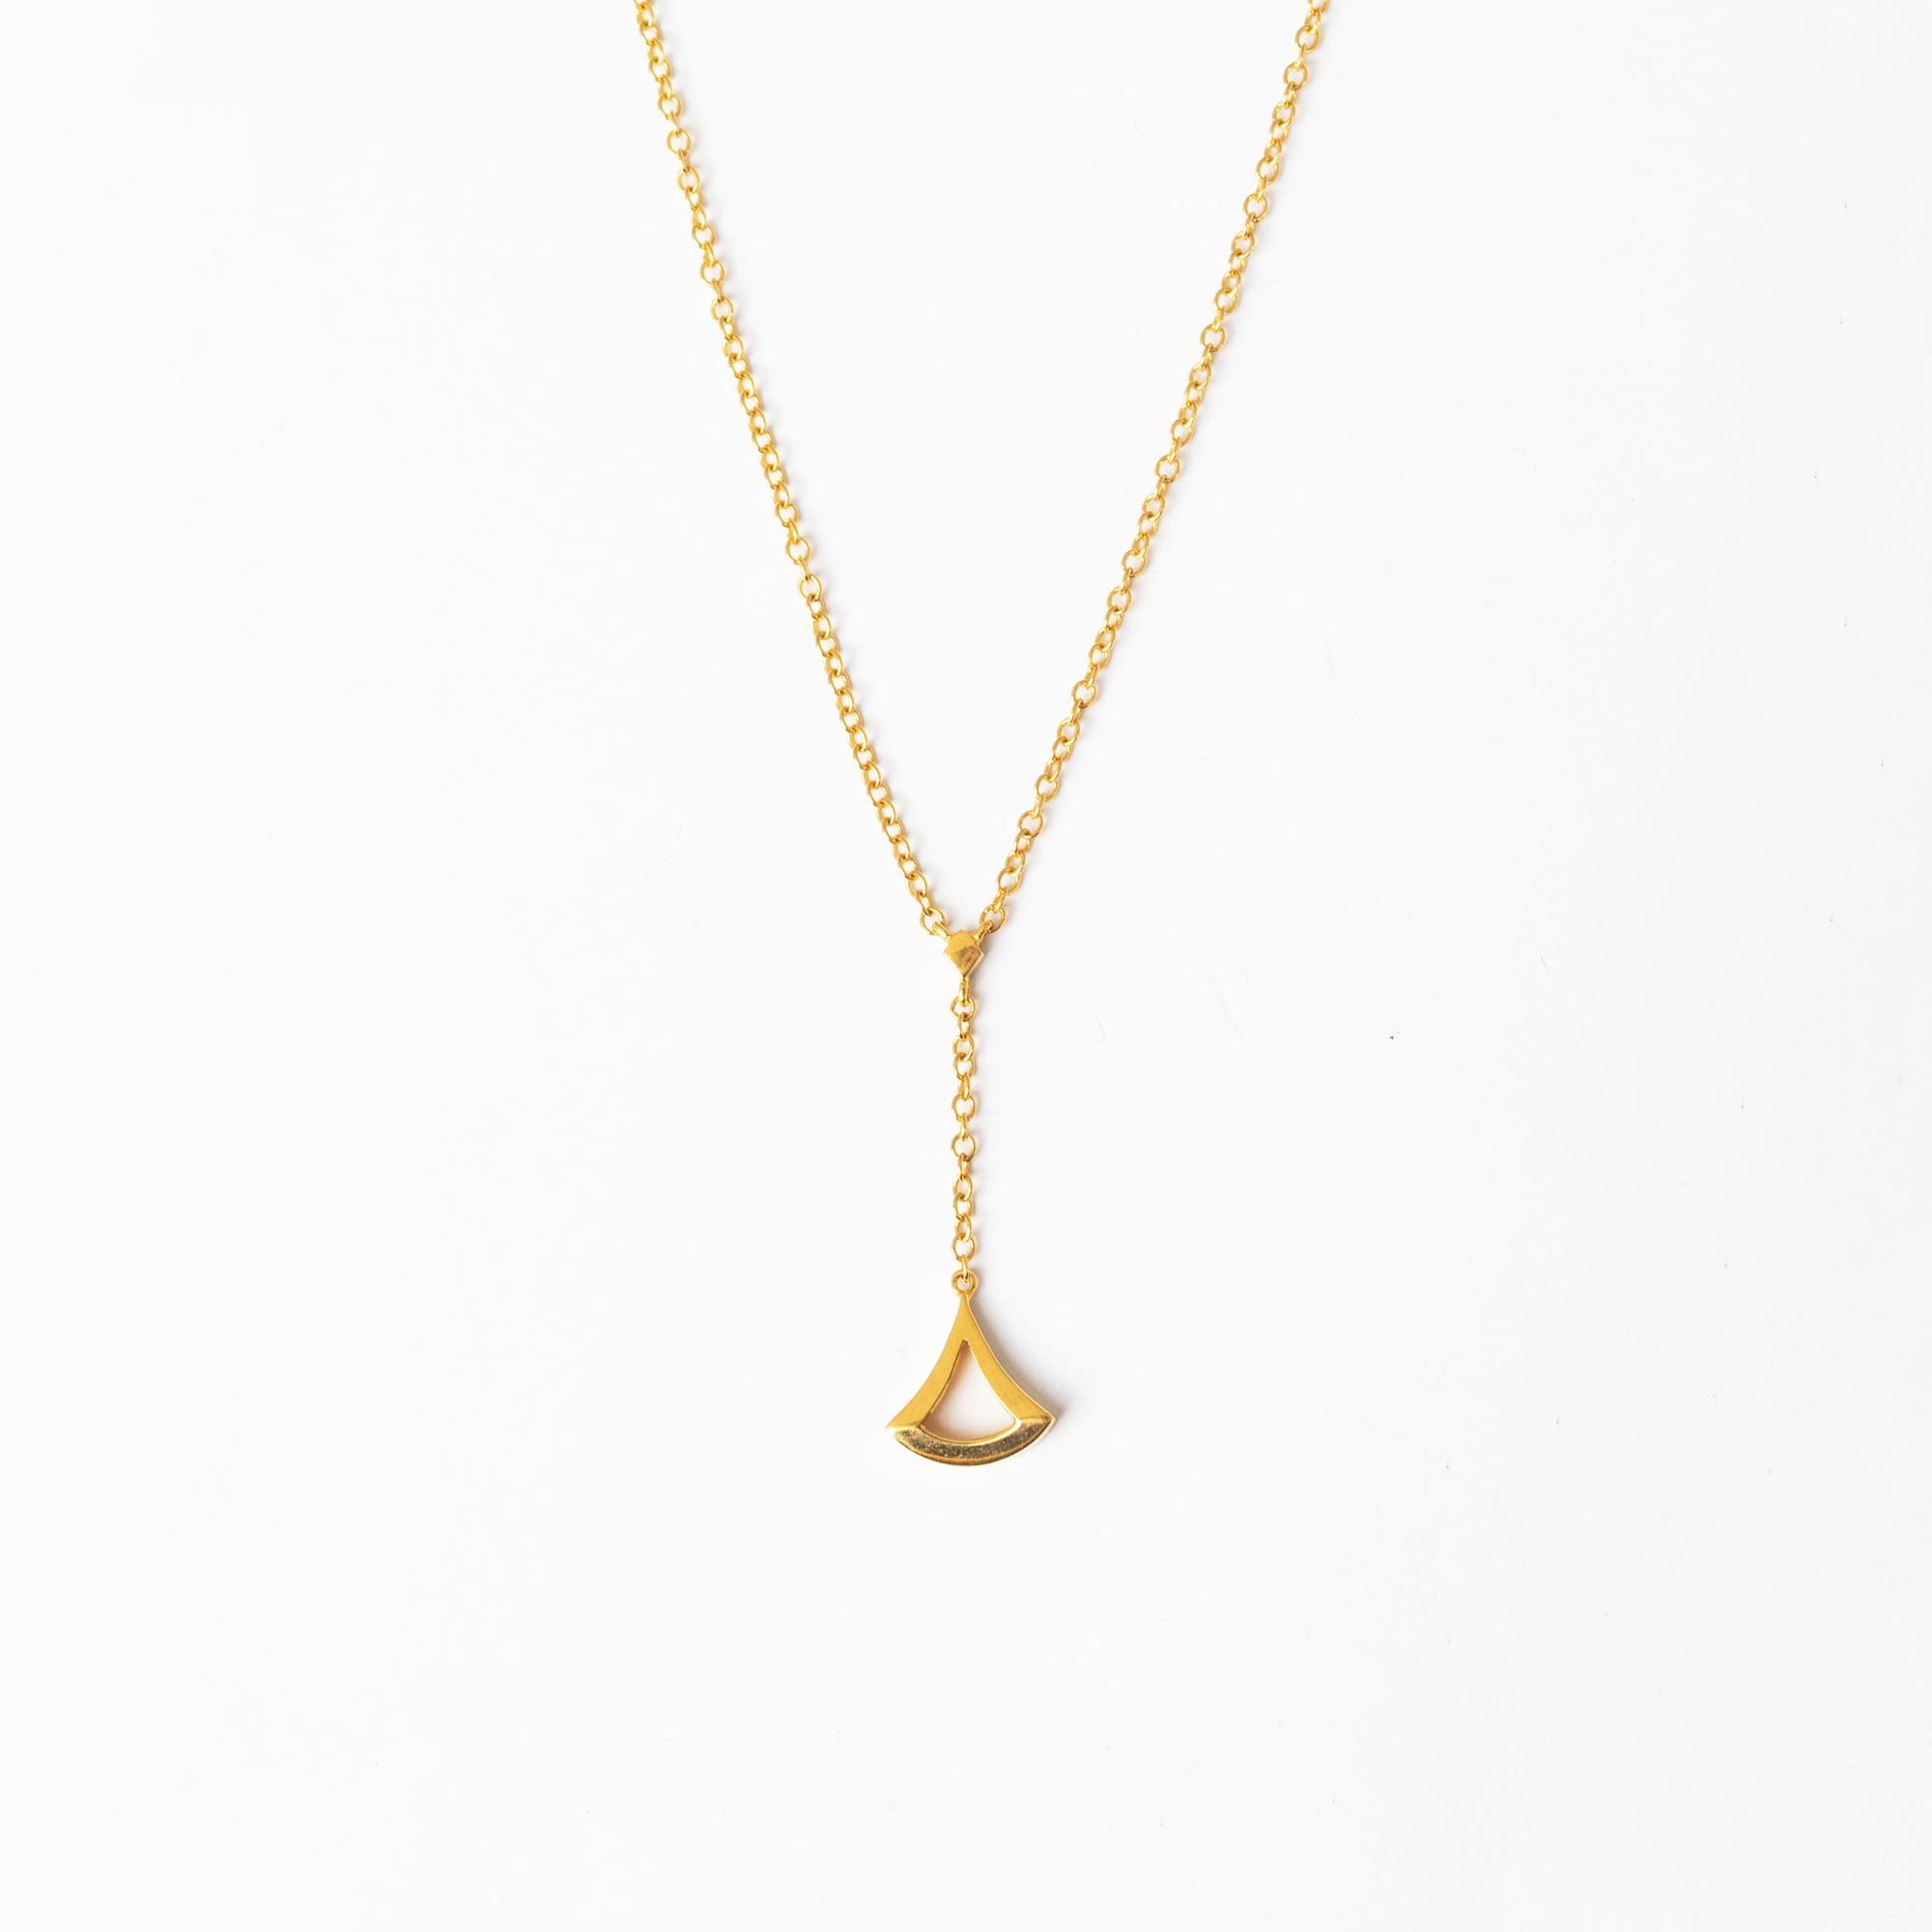 Unusual Triangle Gold Necklace